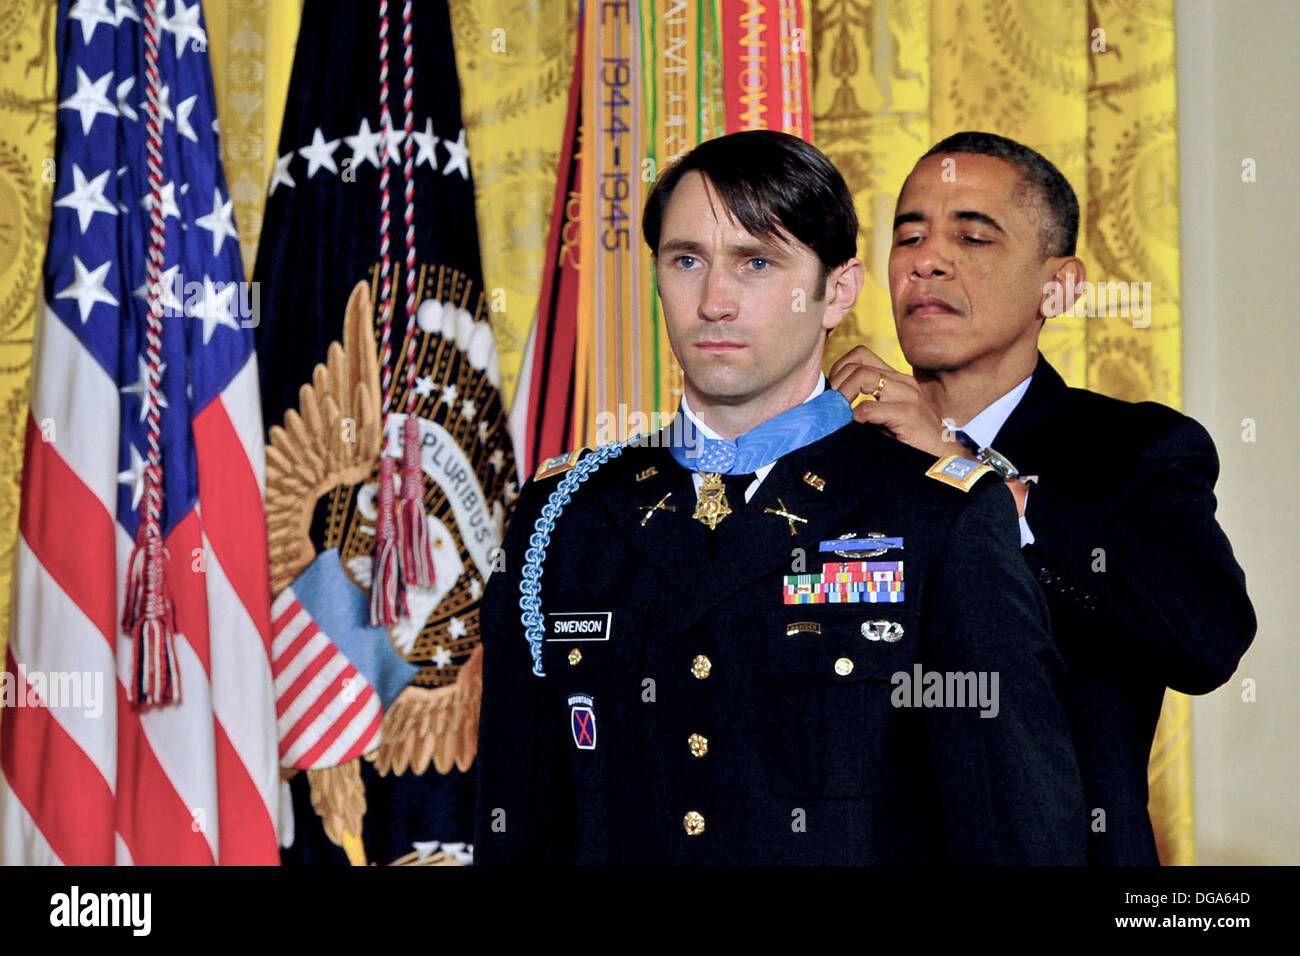 US President Barack Obama presents former Army Capt. William D. Swenson with the Medal of Honor during a ceremony in the East Room of the White House October 15, 2013 in Washington, DC. The Medal of Honor is the nation's highest military honor. Stock Photo